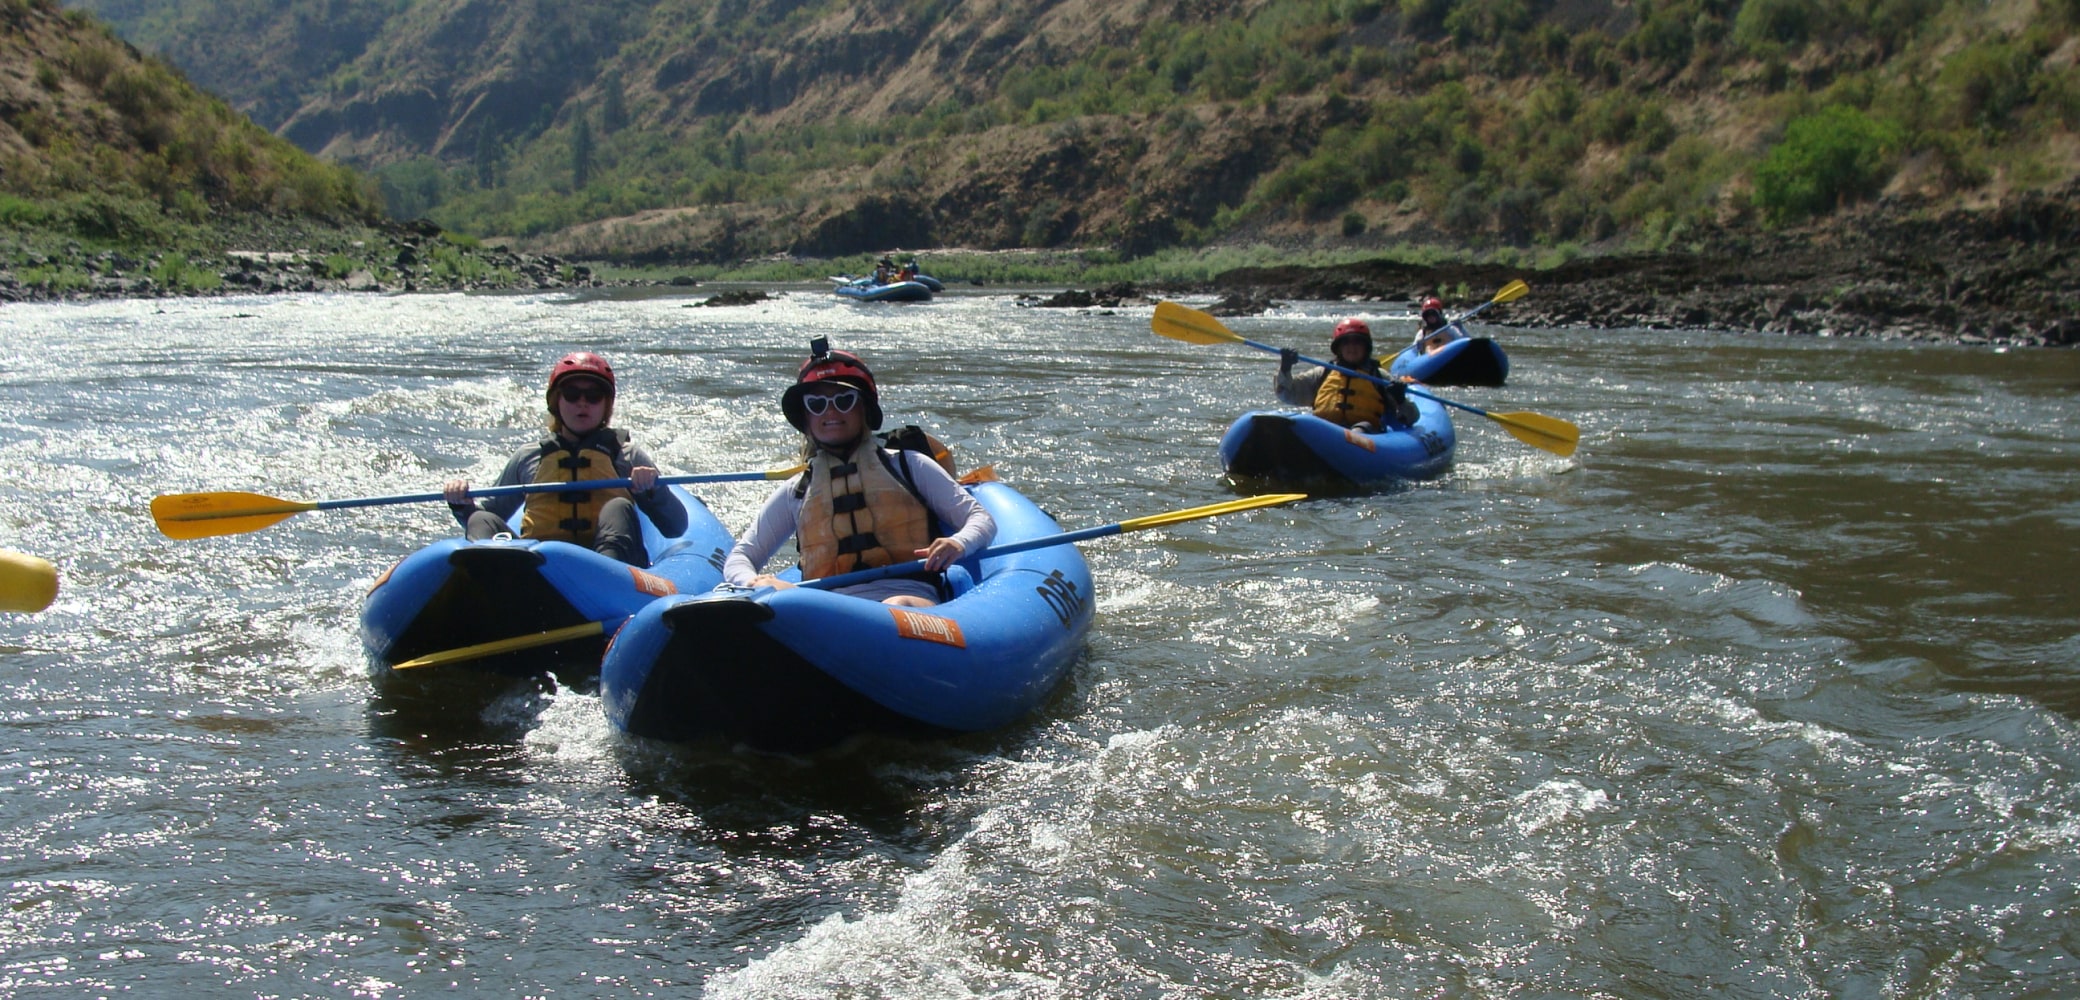 A close up group of happy Kayakers on blue inflatable kayaks on the Salmon River.